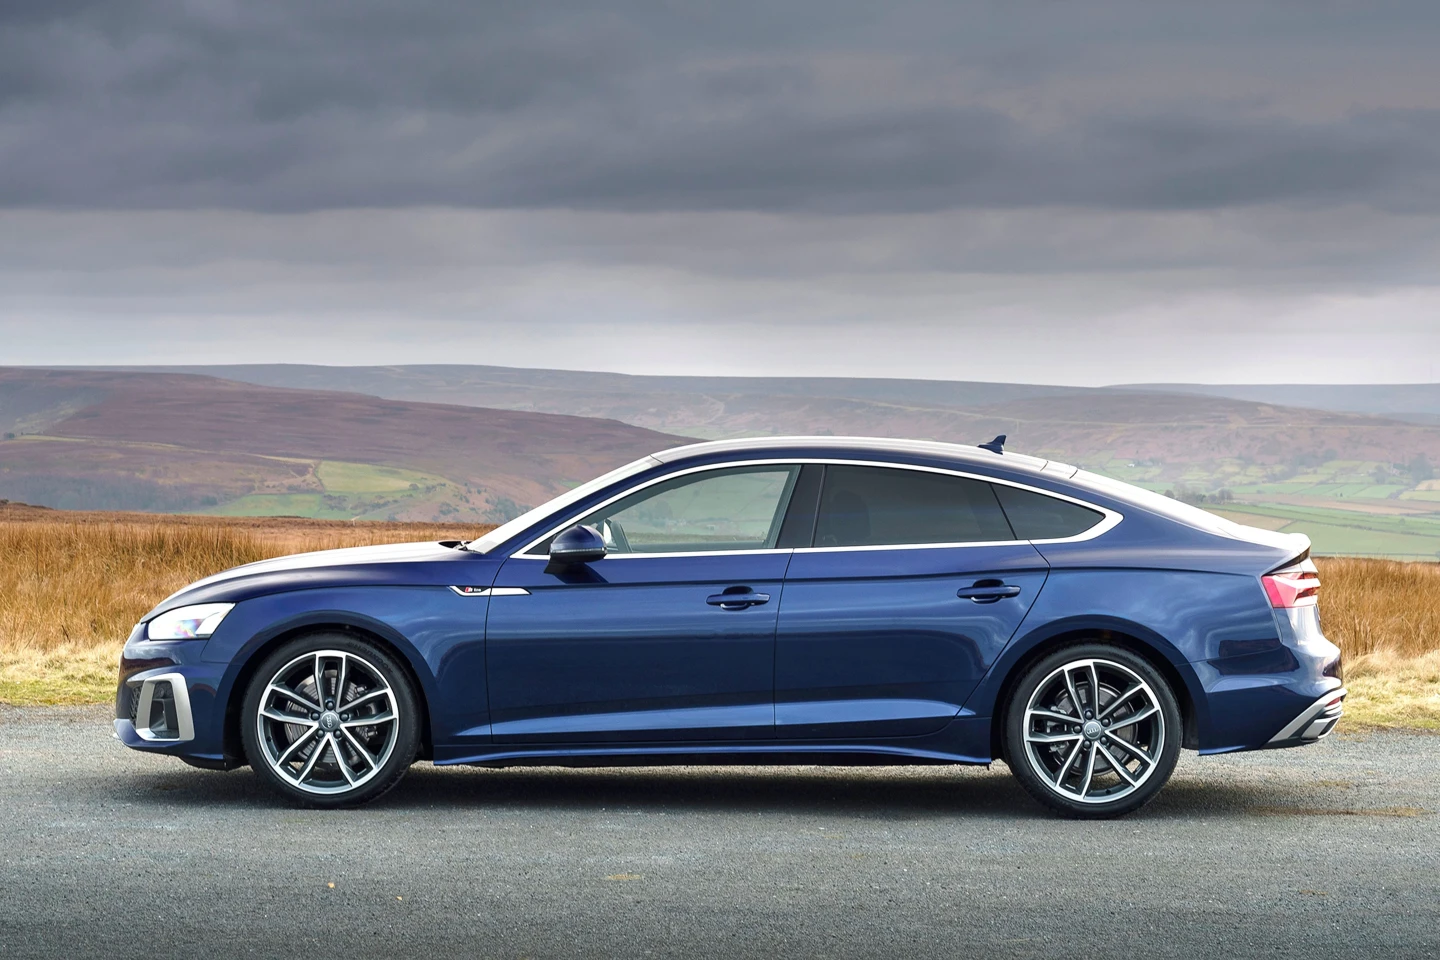 Blue Audi A5 Sportback parked in a countryside setting